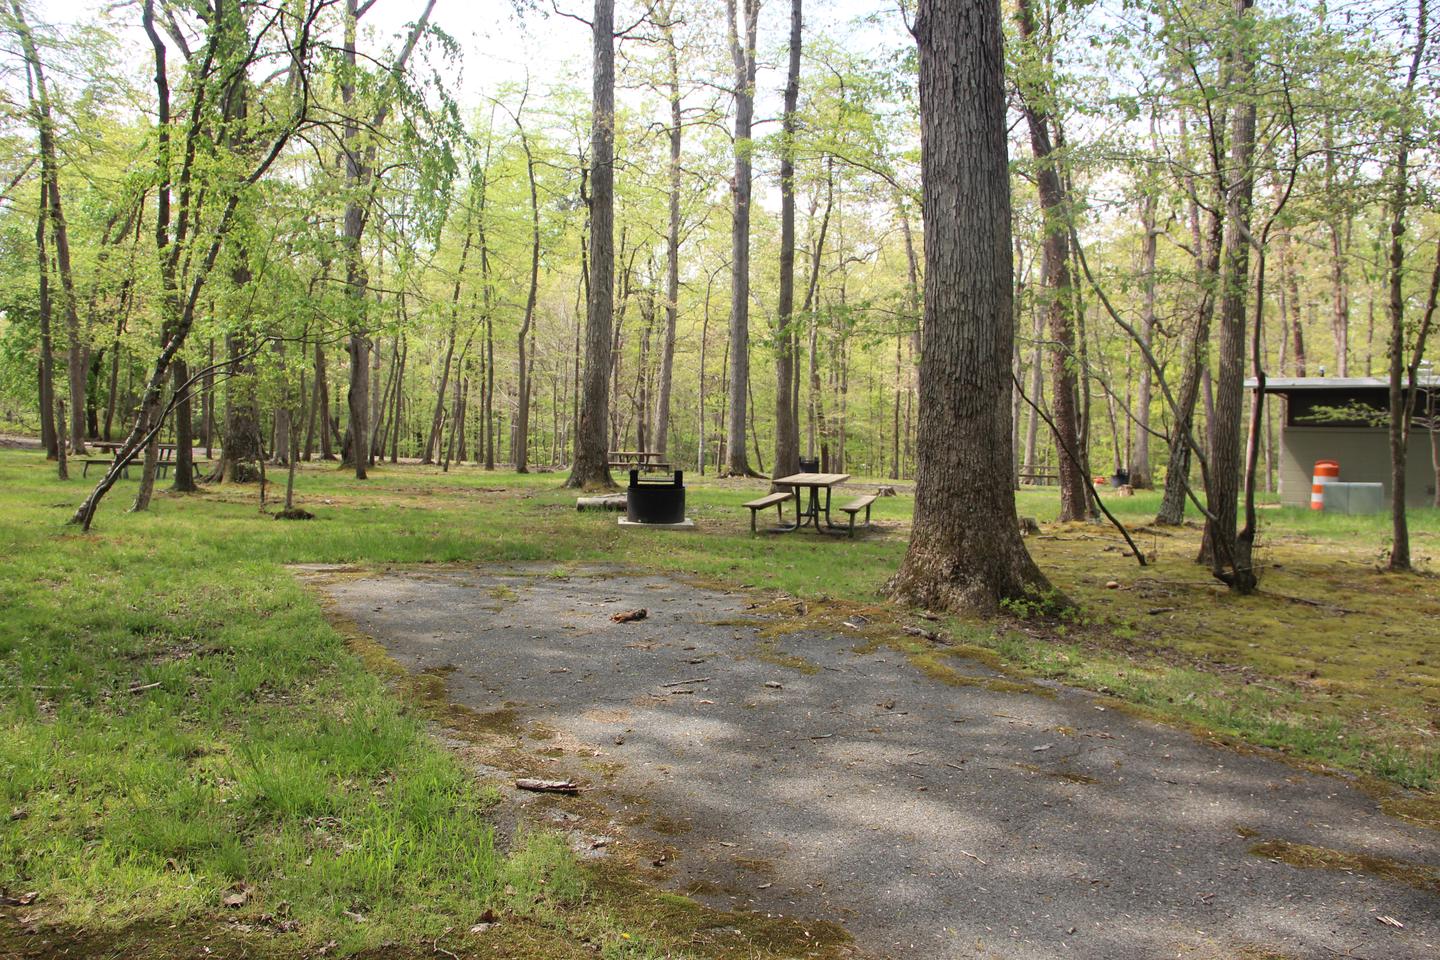 C92 C Loop of the Greenbelt Park Maryland campground